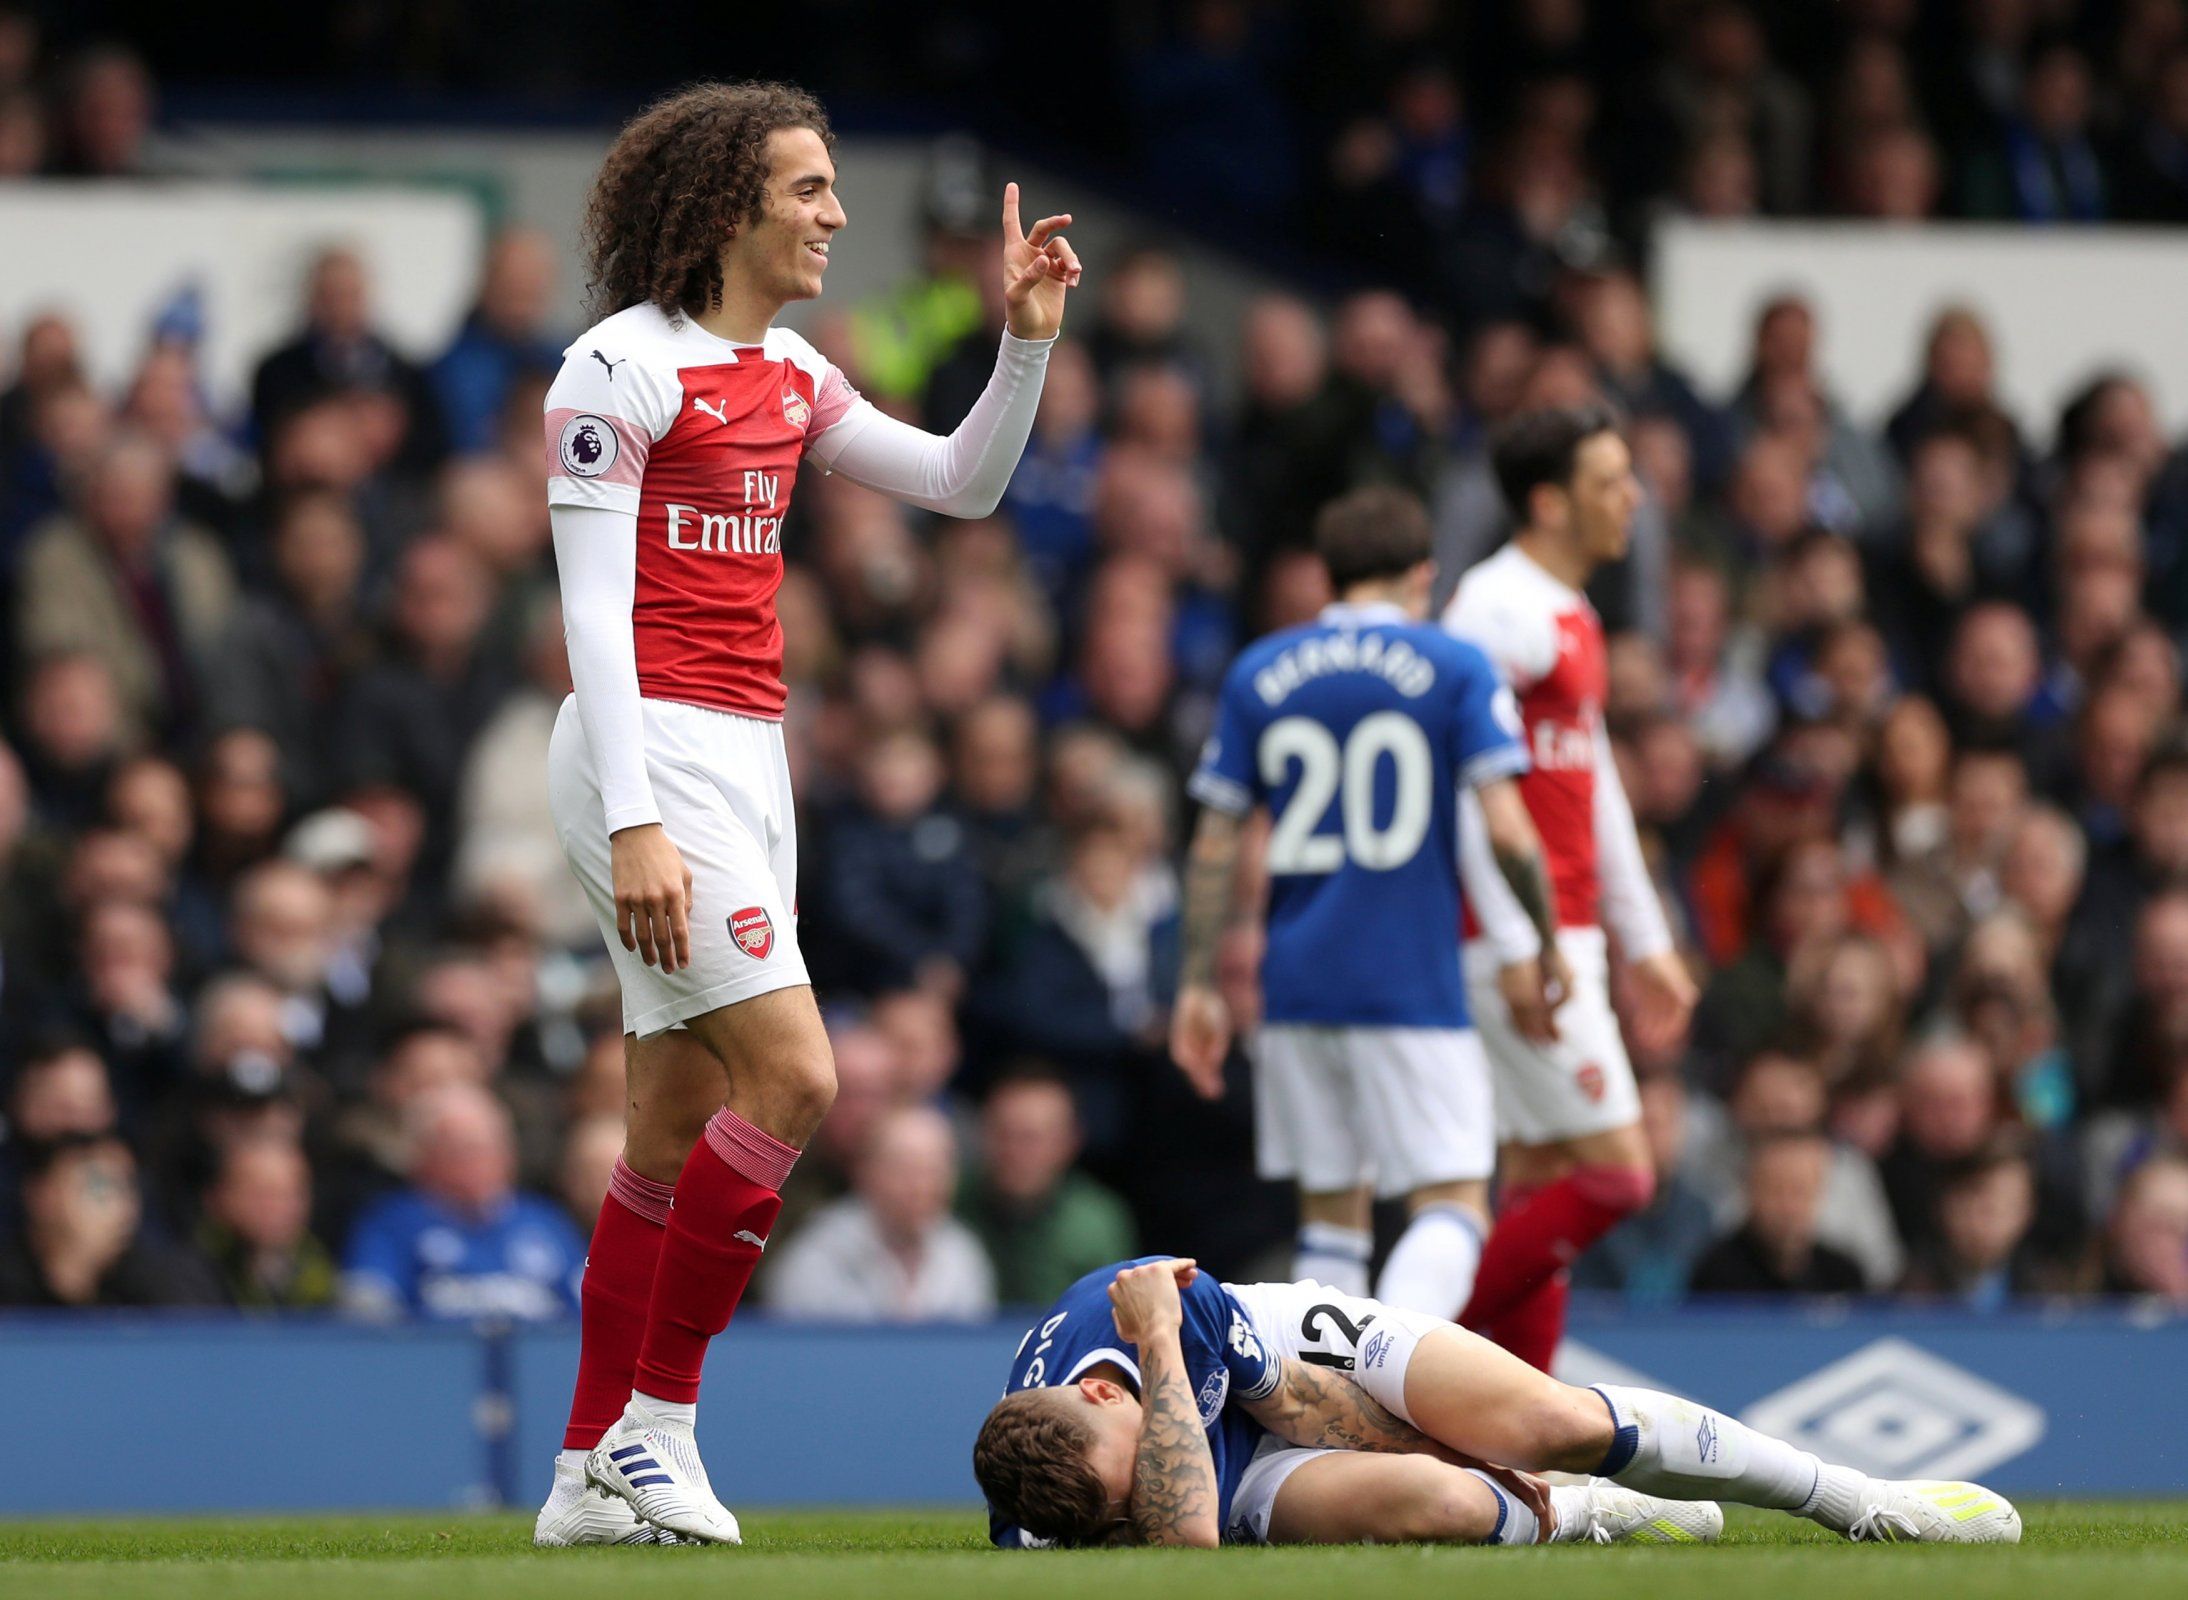 Arsenal midfielder Matteo Guendouzi reacts after being booked vs Everton